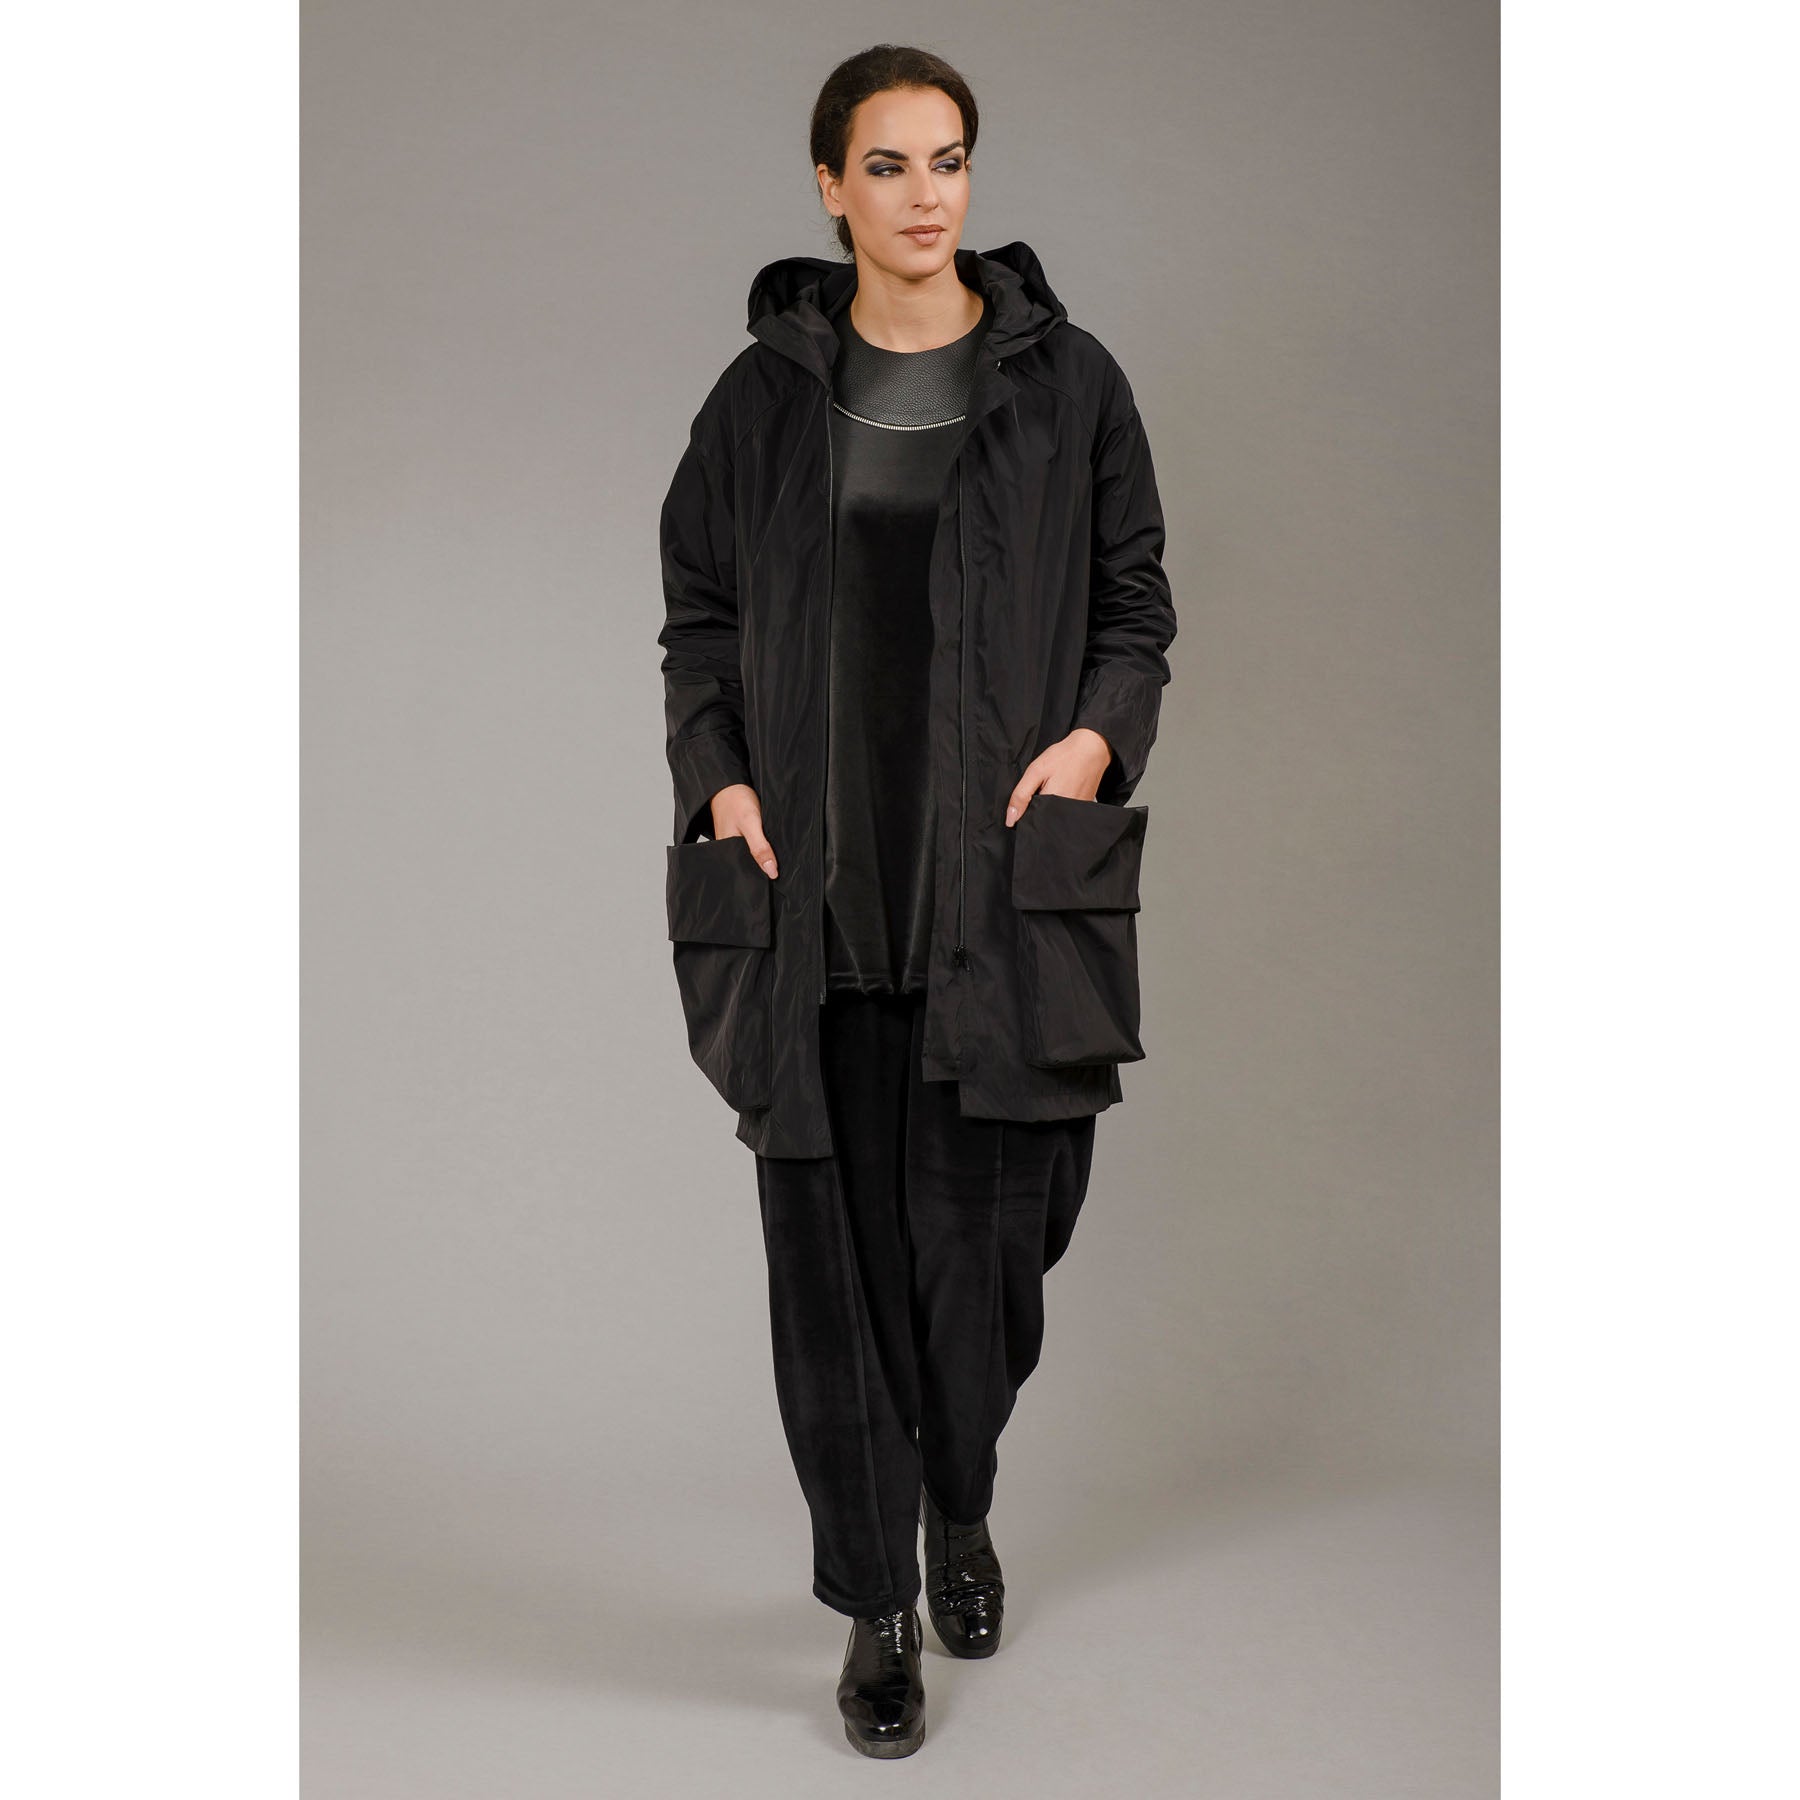 Merkel coat and Anna blouse with Myrto - Black trousers